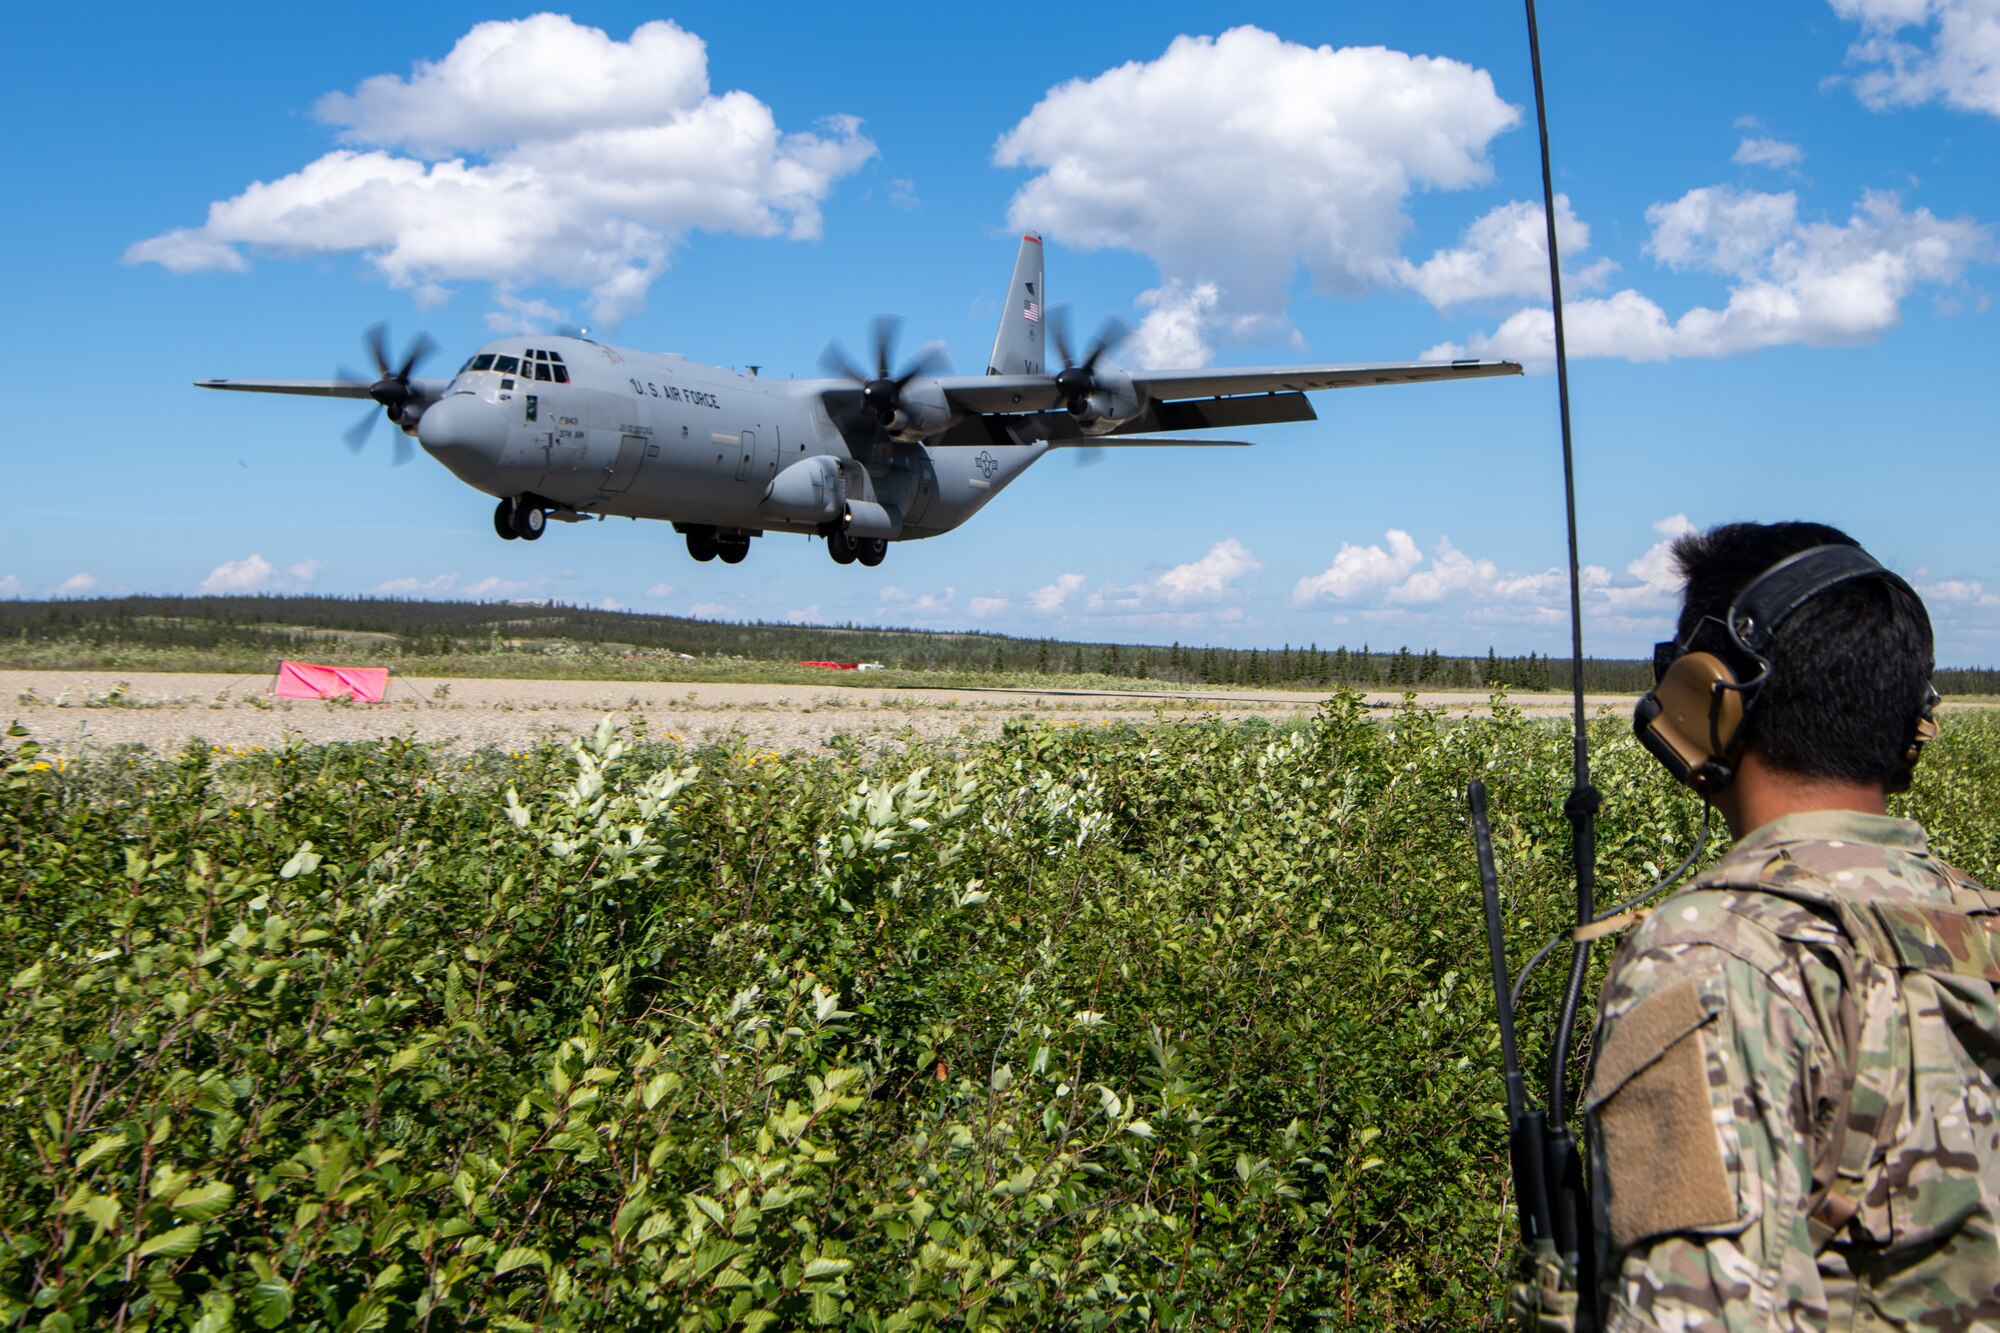 An Airmen observes a C-130 come in for a landing on a dirt runway.